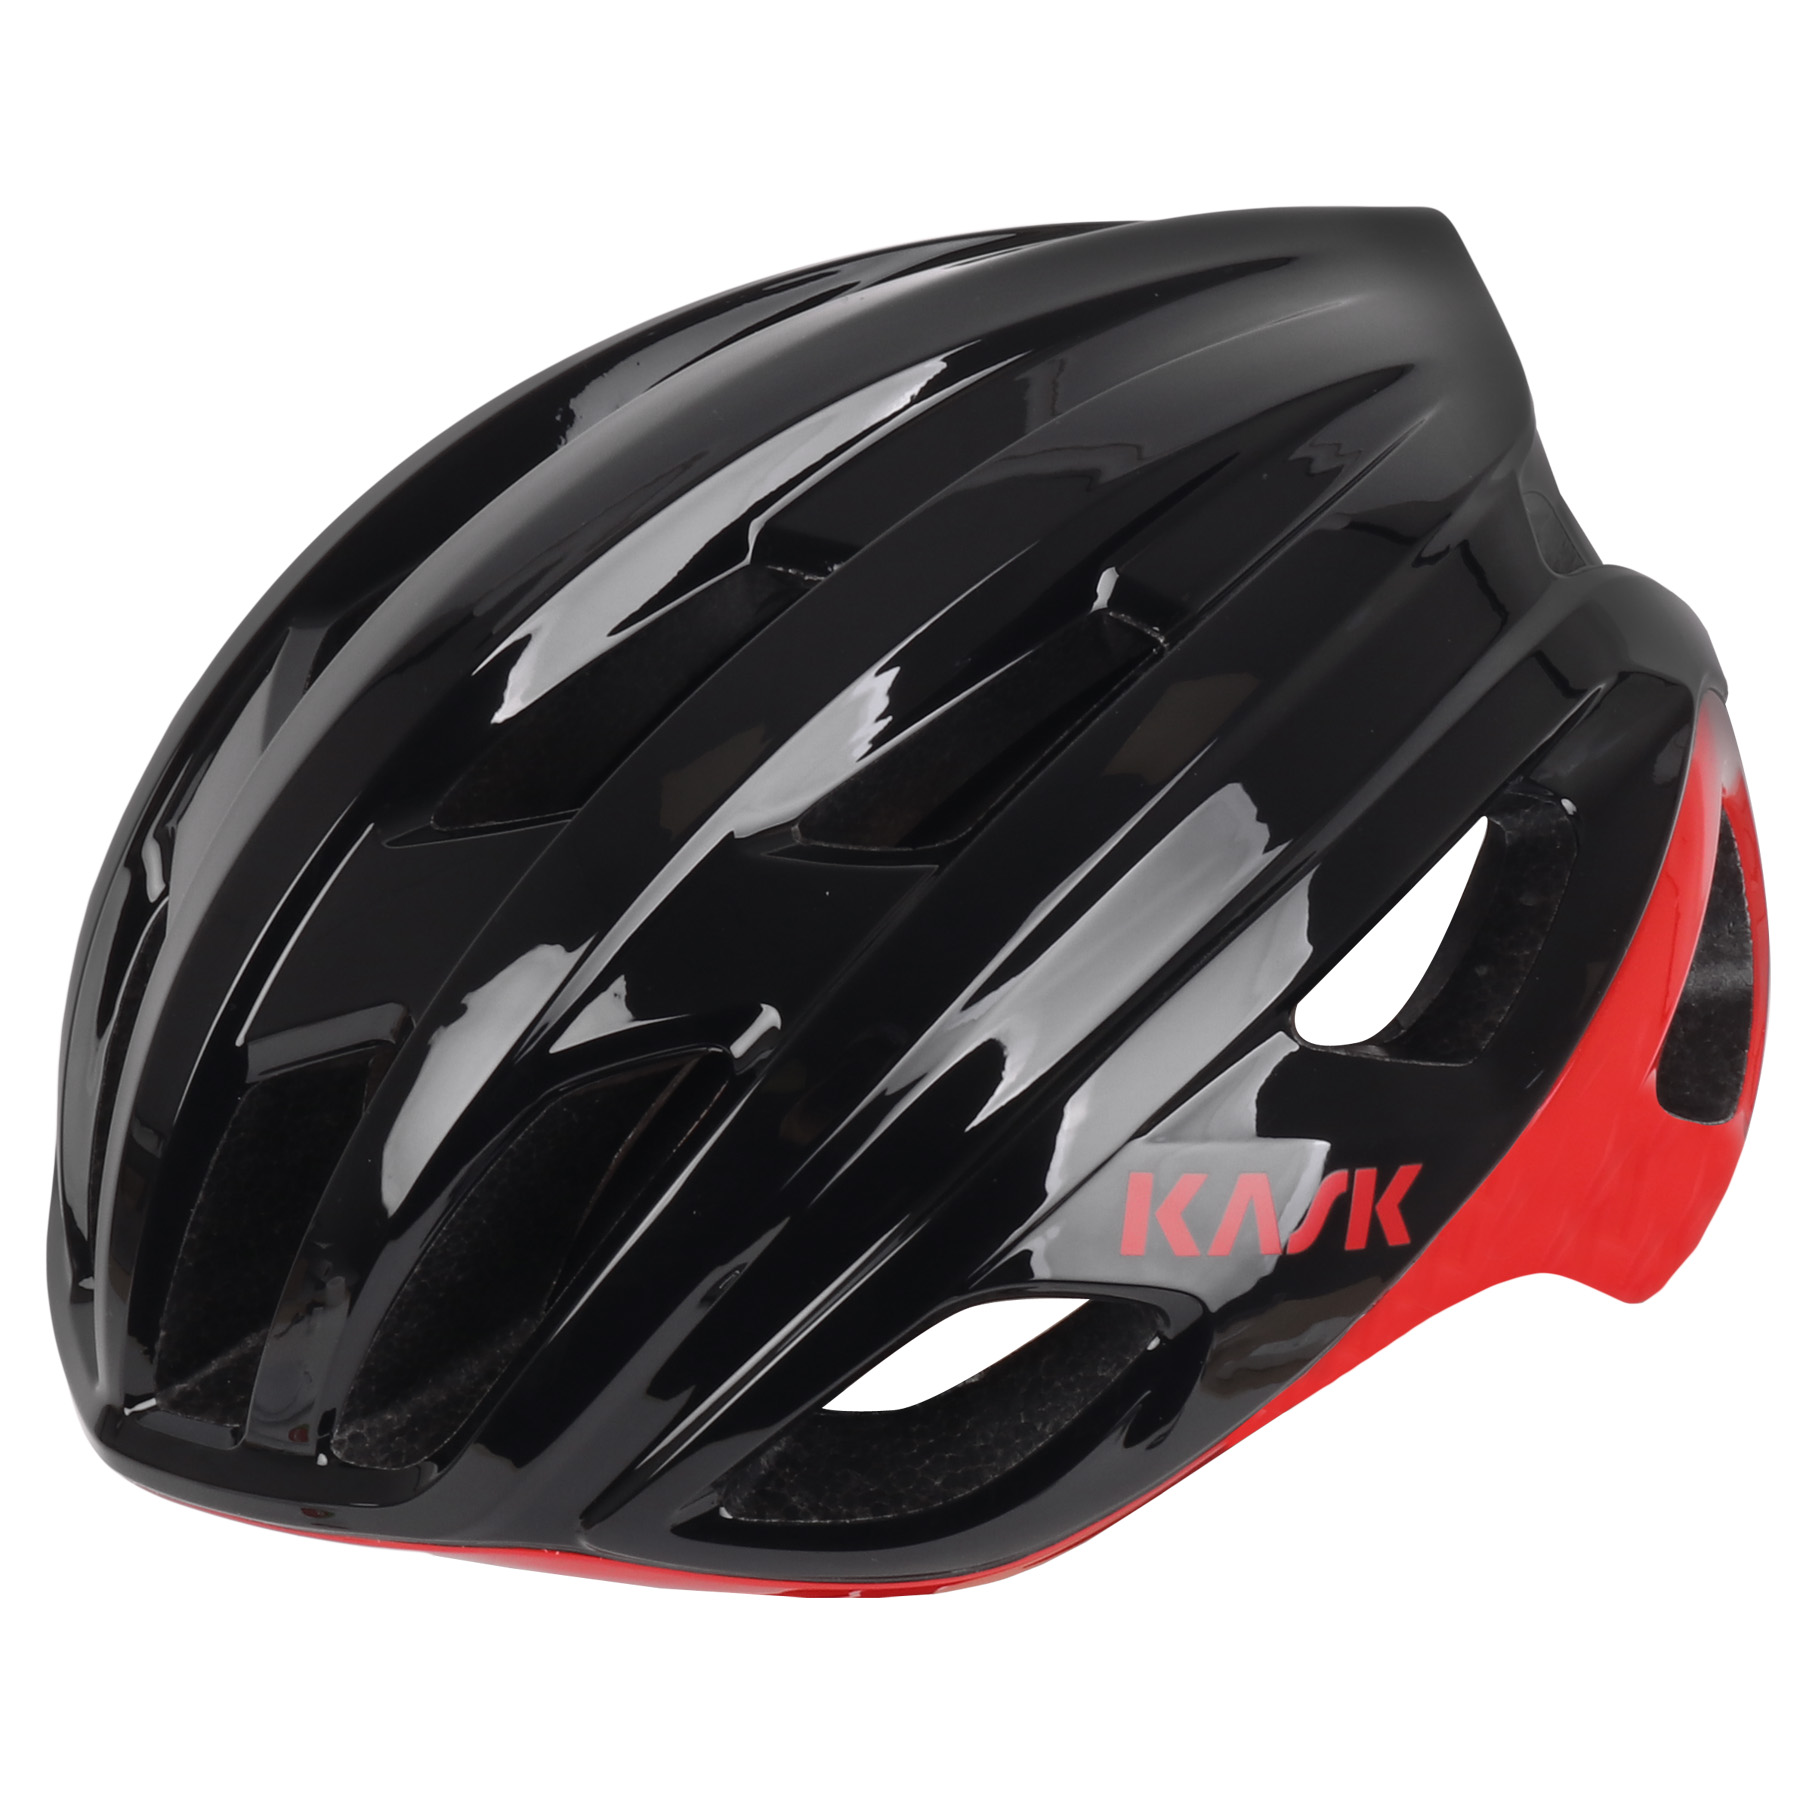 Picture of KASK Mojito³ WG11 Road Helmet - Bicolor Black/Red